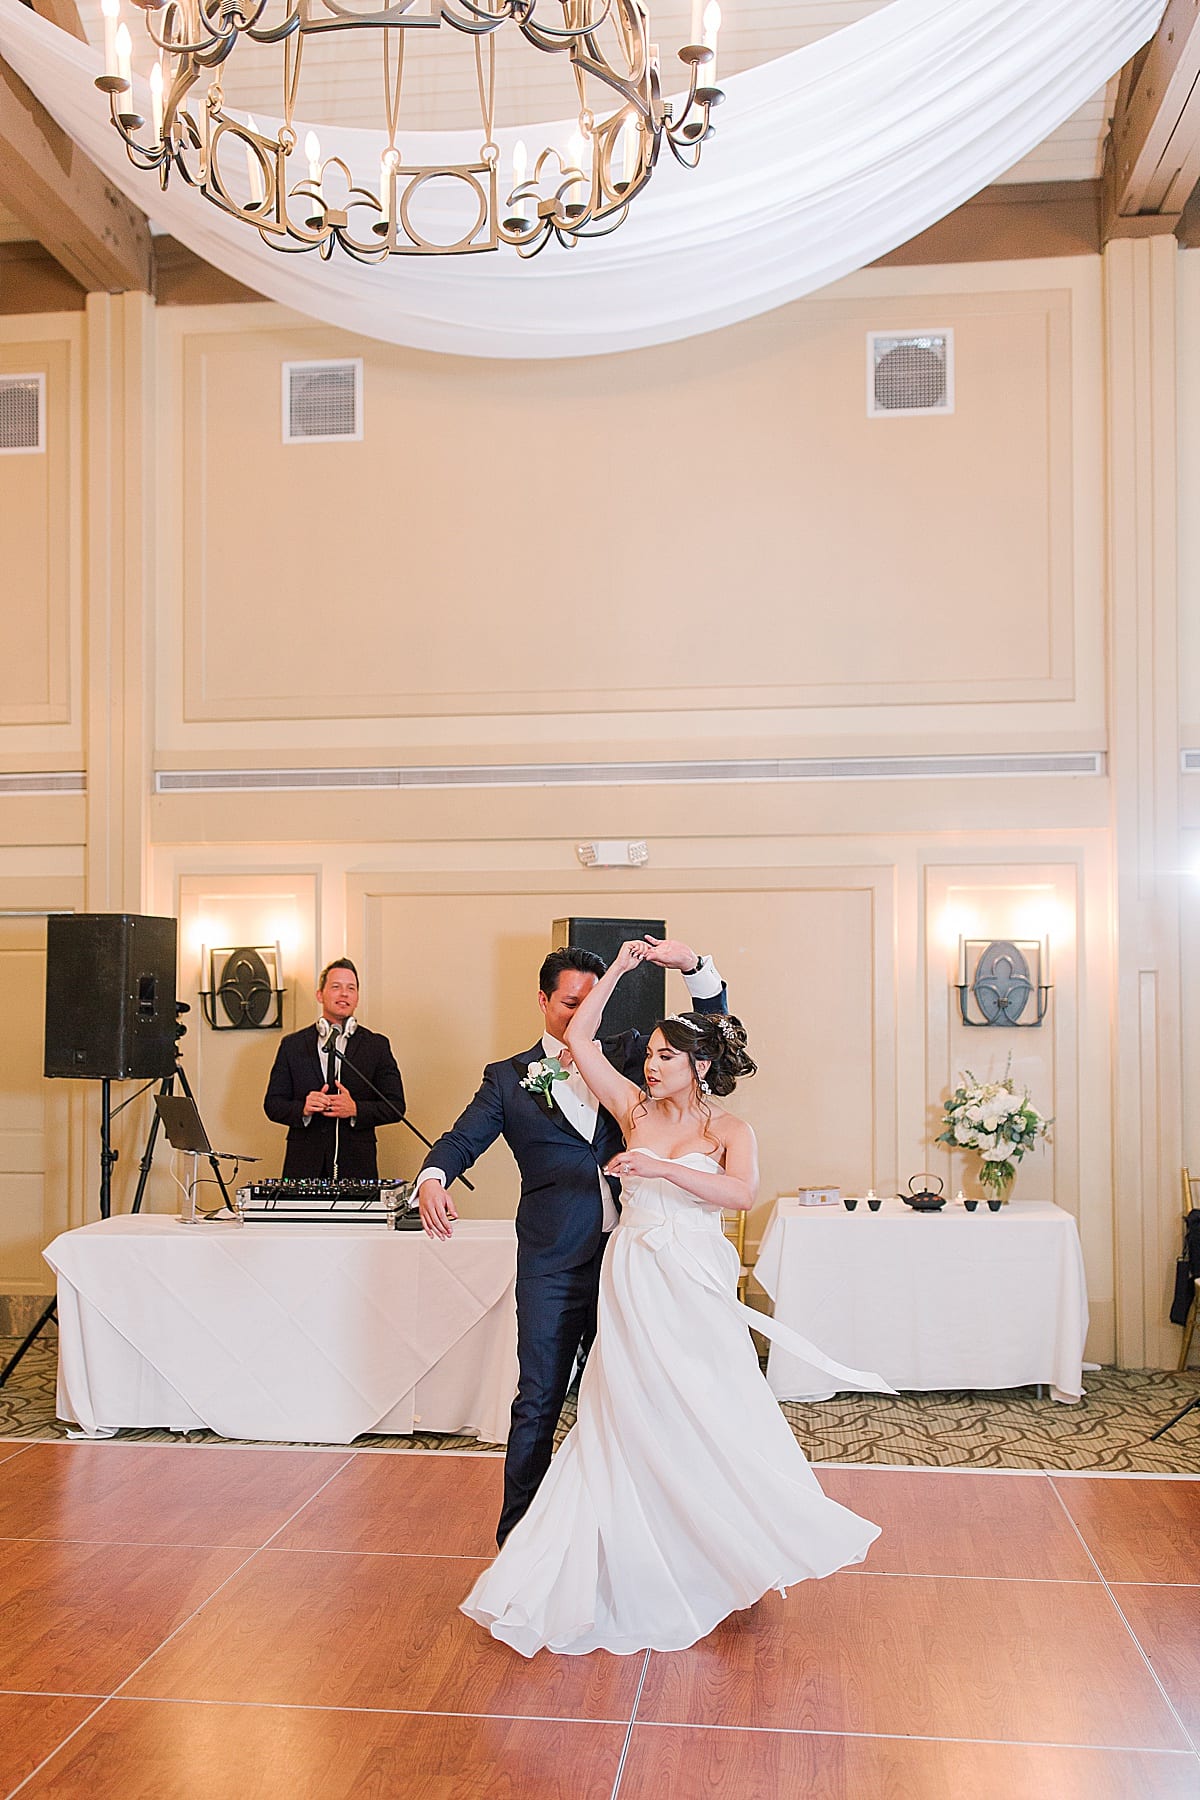 Country Club Of The South Bride and Groom First Dance Photo